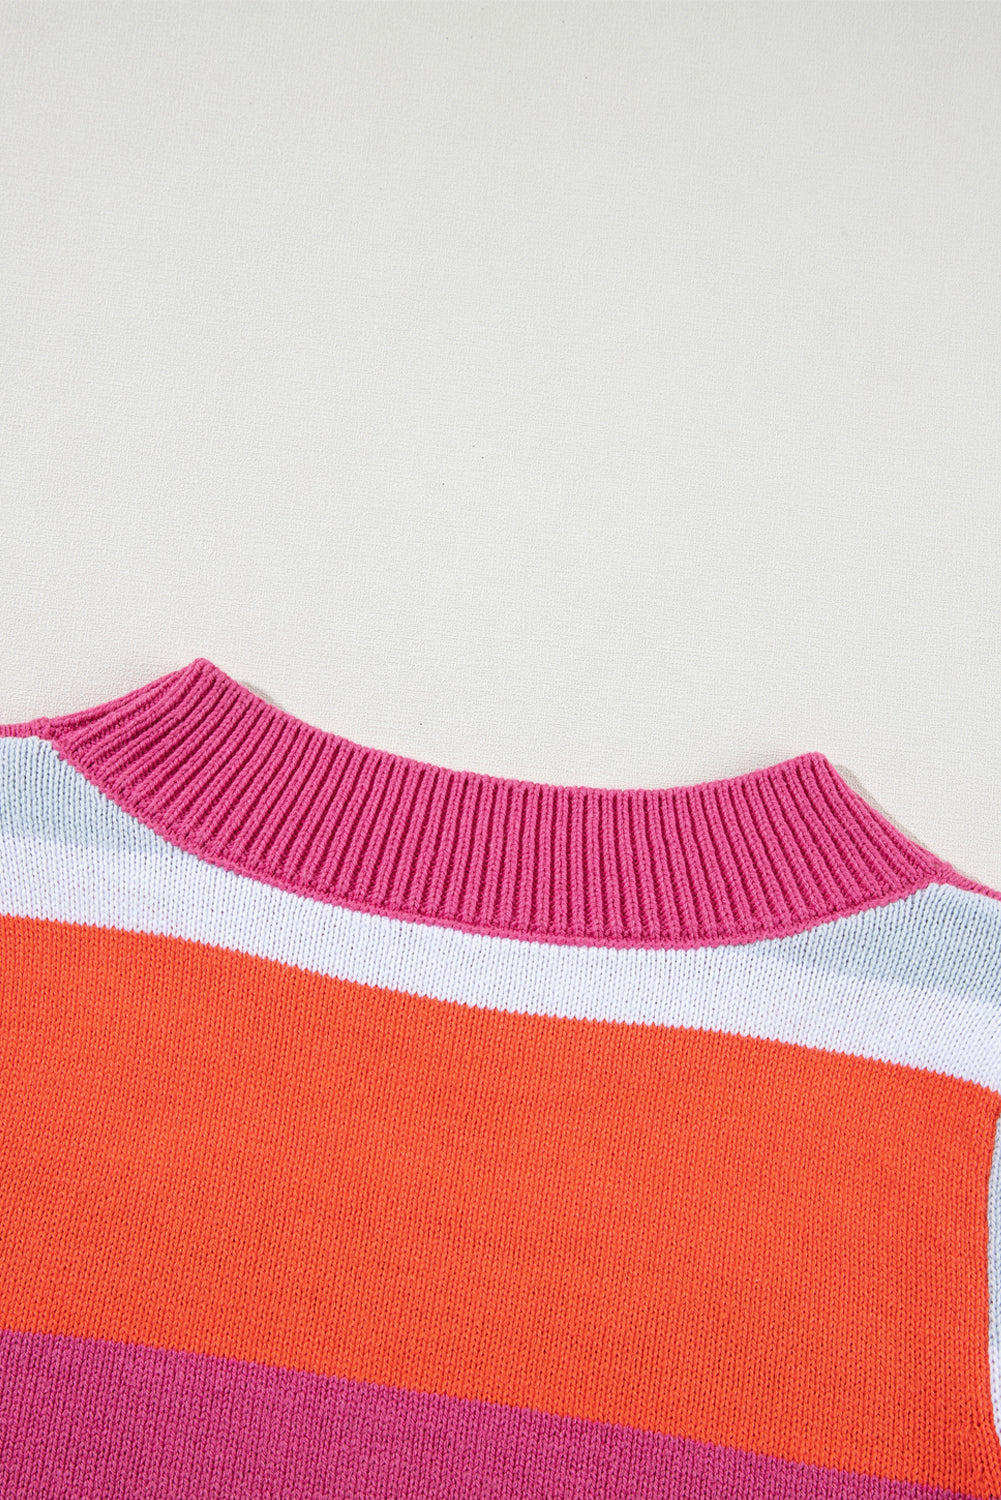 Bright Pink and Orange Striped Cropped Short Sleeve Sweater